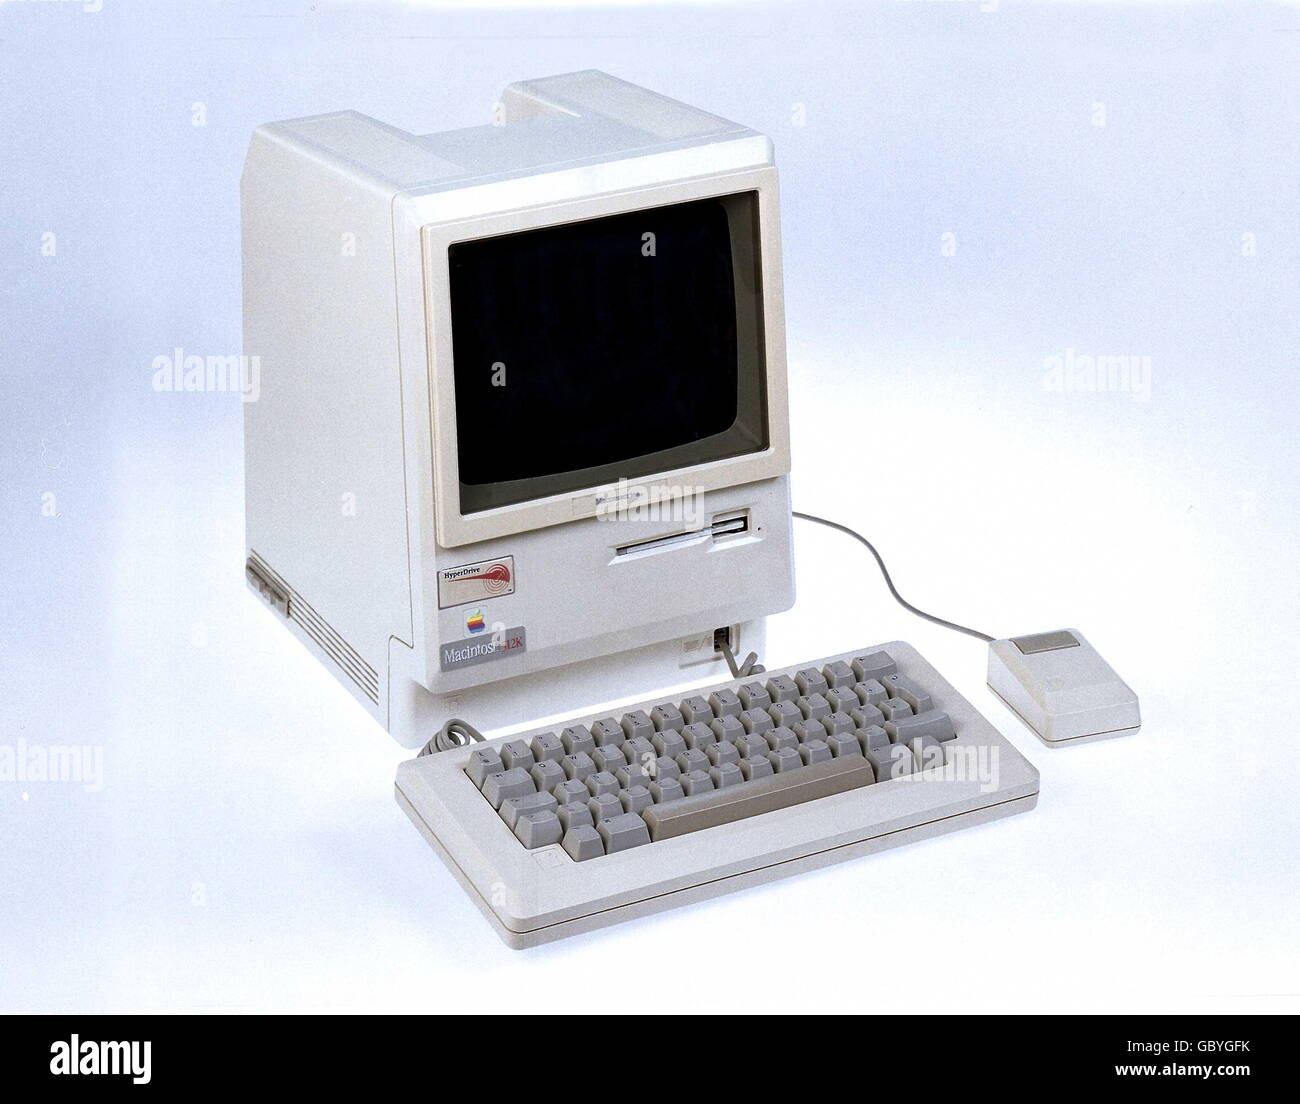 inventions, electronics, computer, Apple Macintosh 512 k with integrated monitor and 3,5' disk drive, keyboard, mouse, USA, 1984, Additional-Rights-Clearences-Not Available Stock Photo